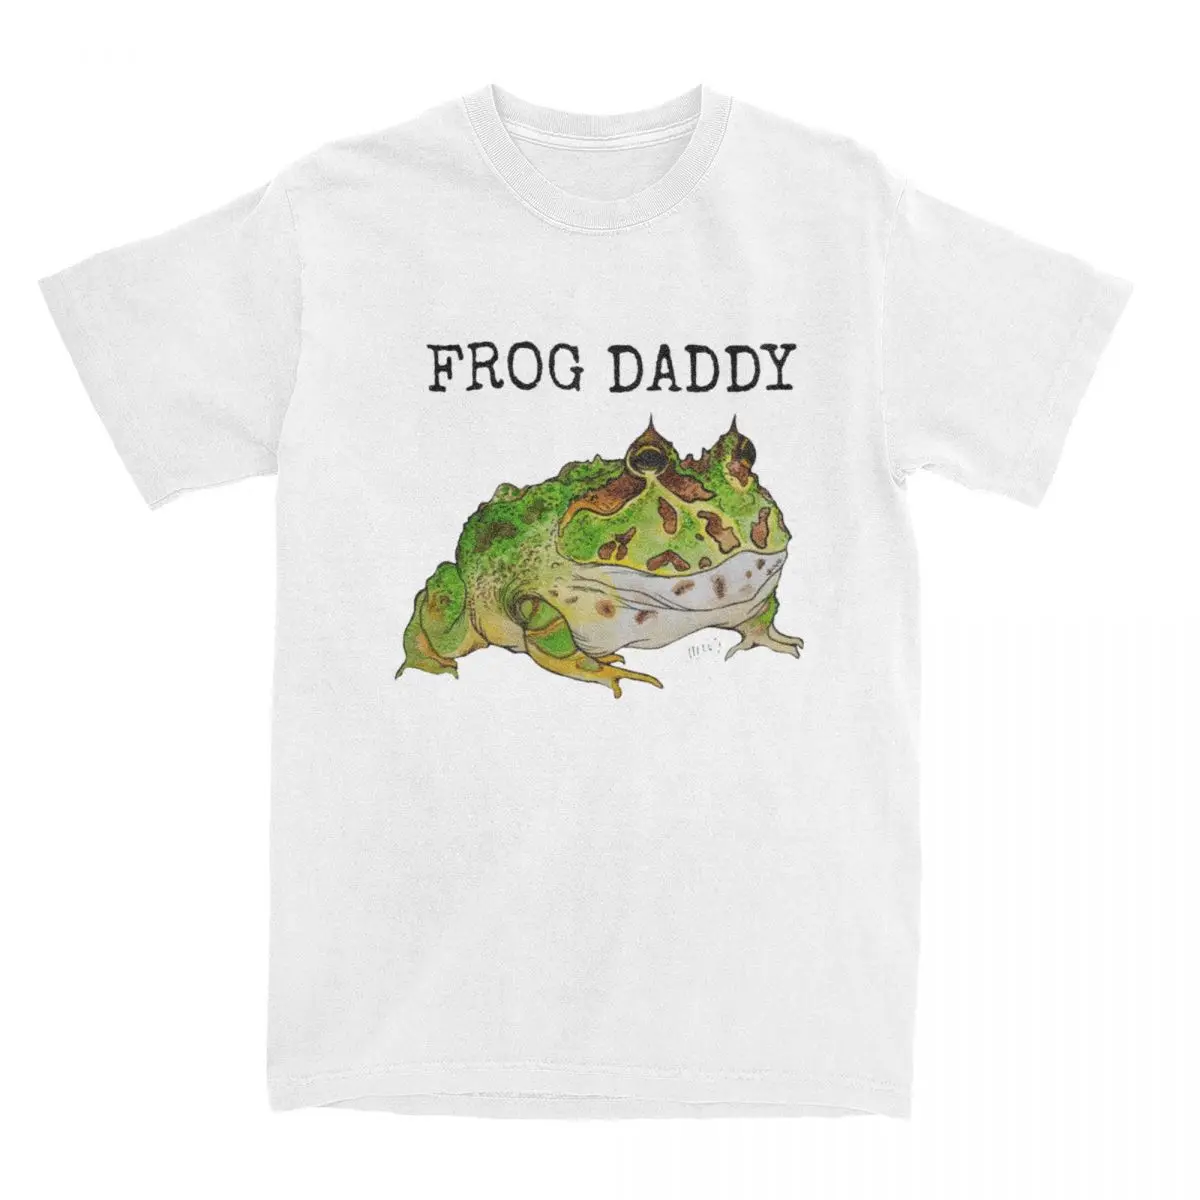 

Pacman Frog Daddy Shirt Merch Men Women's Pure Cotton Vintage Horned Frogs Tee Shirt Short Sleeve Clothes Plus Size